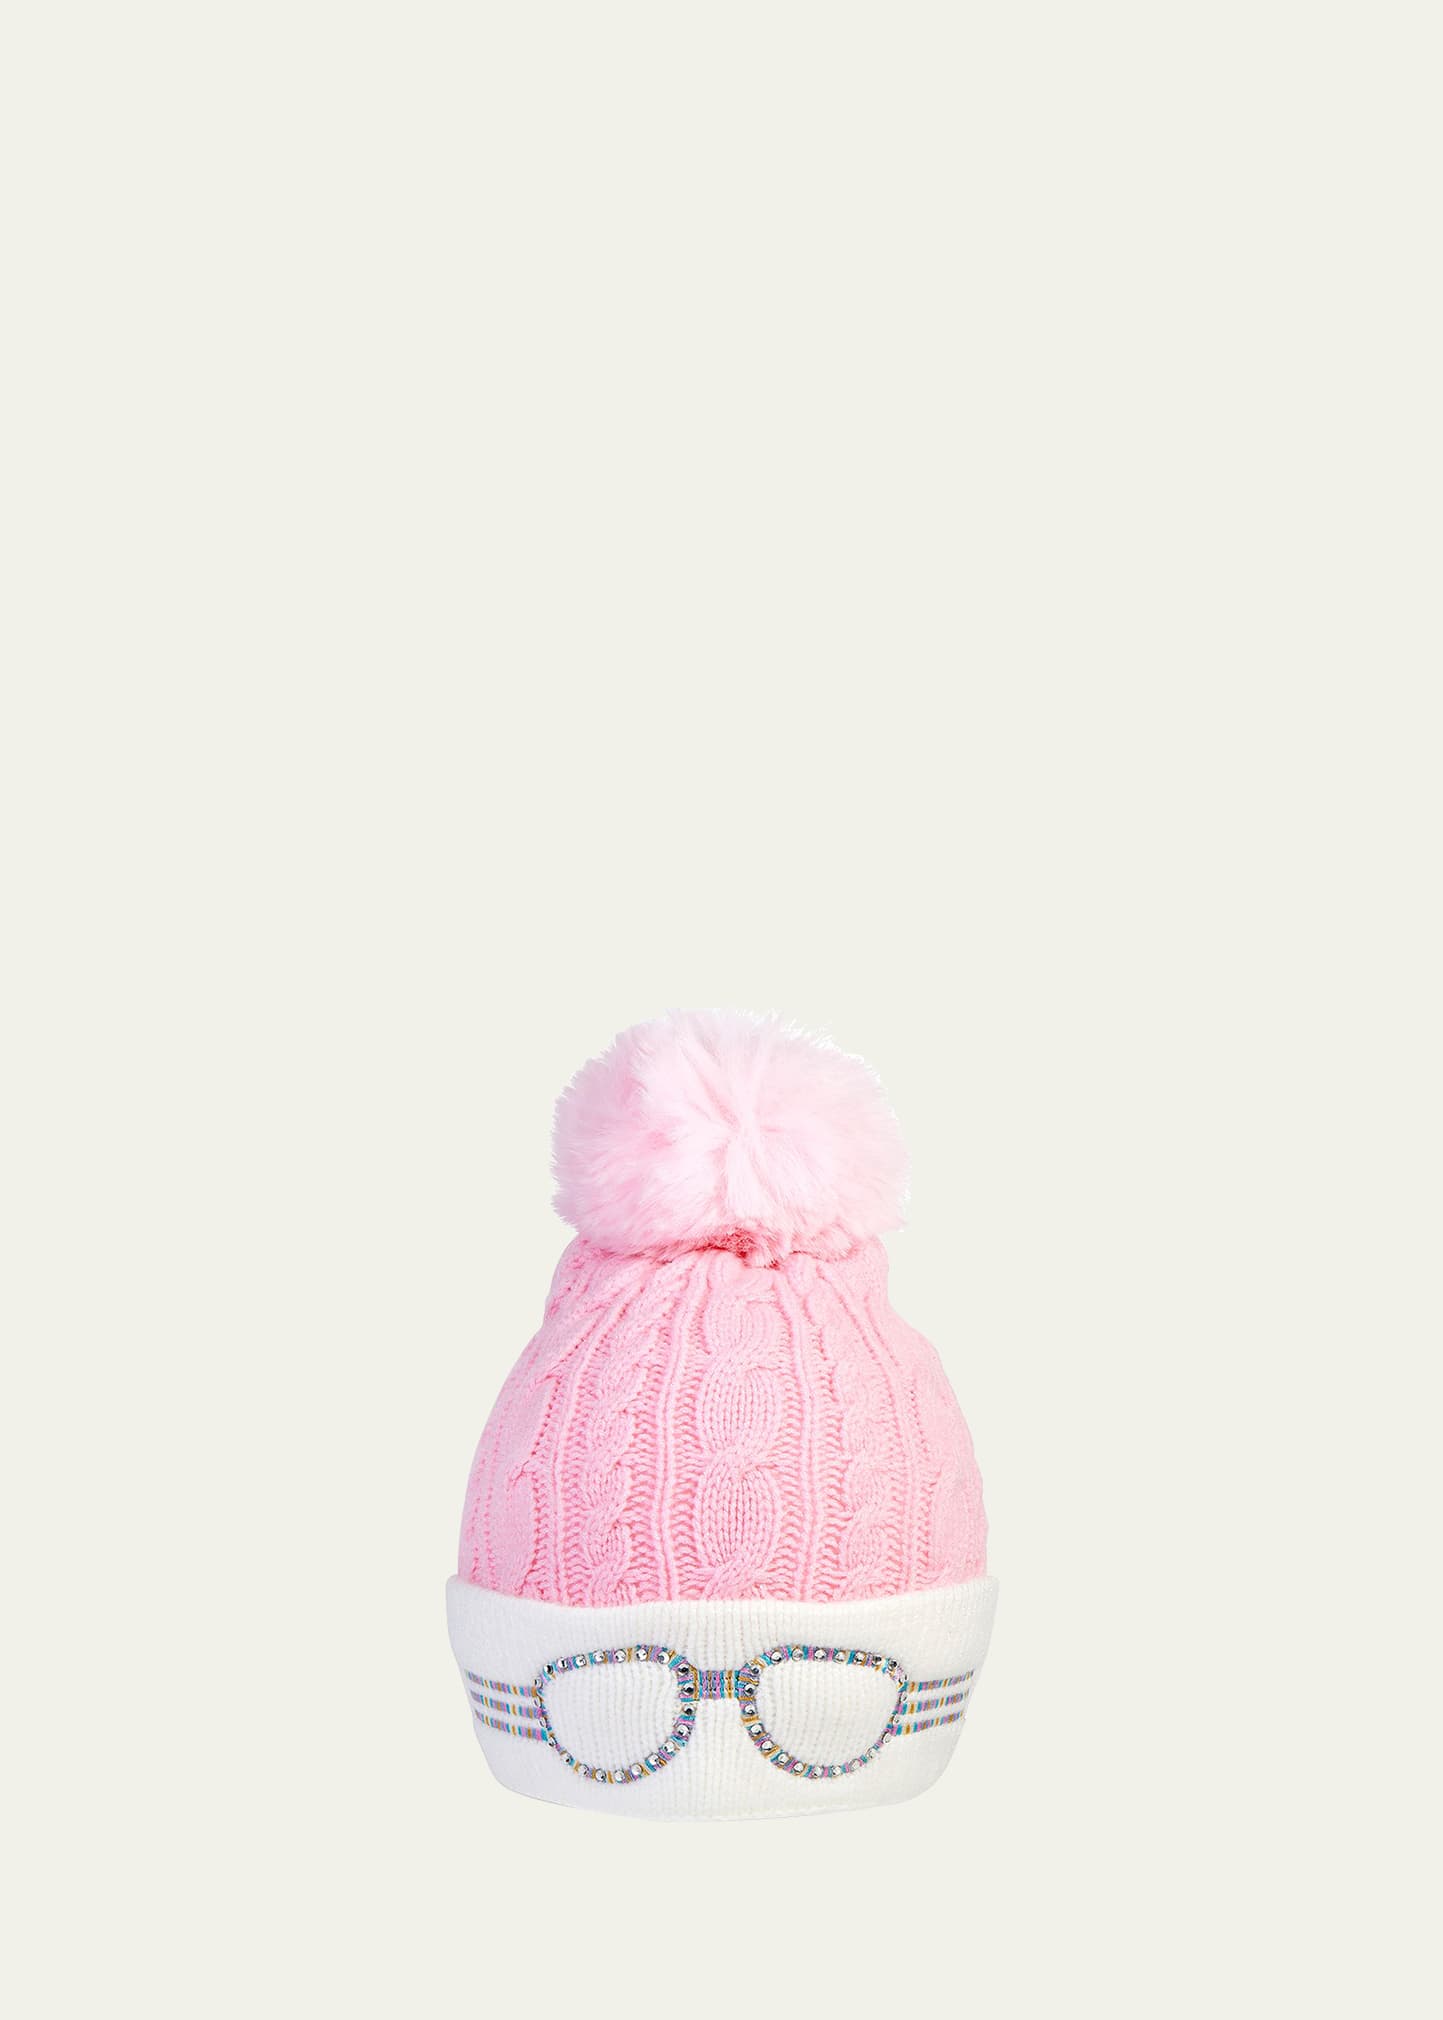 Bling2o Kid's Embellished Beanie W/ Faux-fur Pompom In Pink